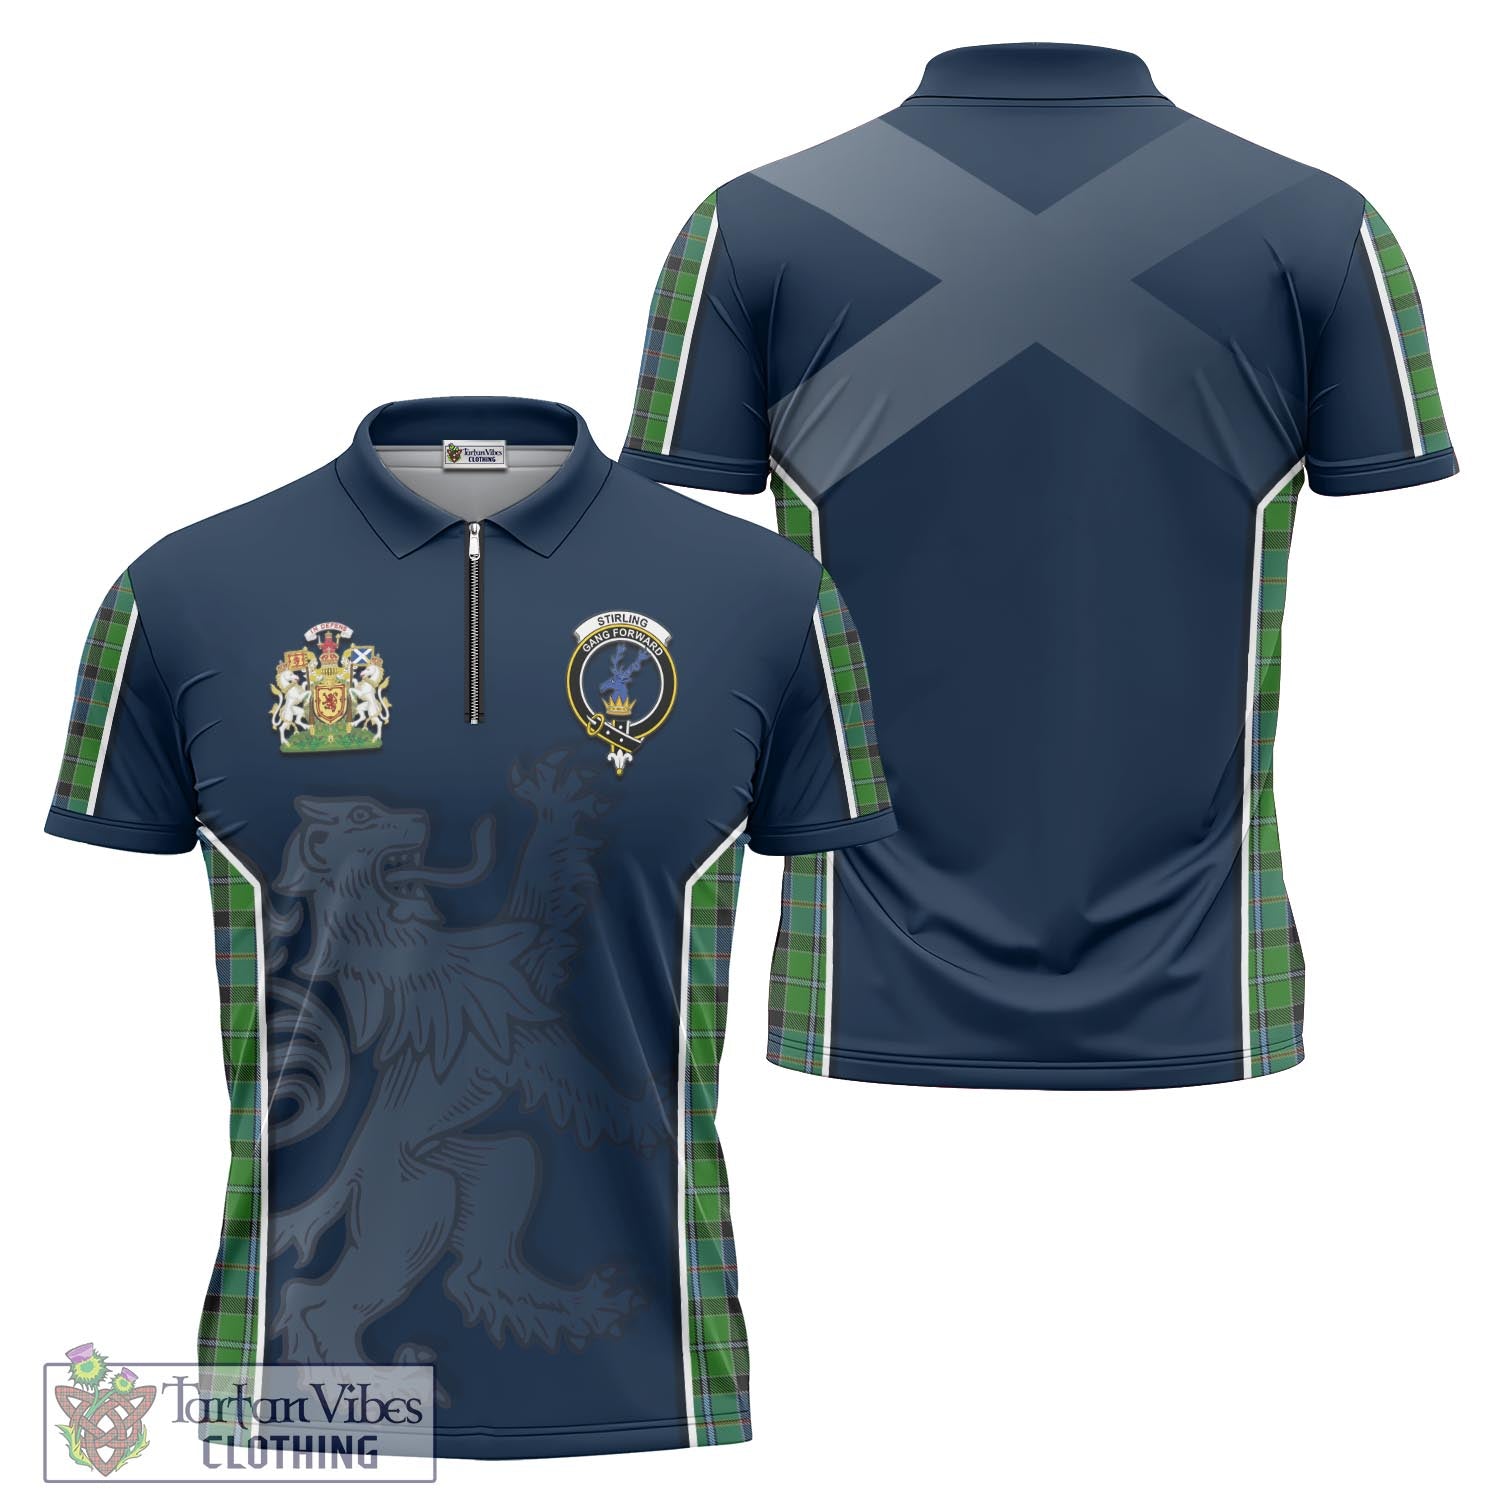 Tartan Vibes Clothing Stirling Tartan Zipper Polo Shirt with Family Crest and Lion Rampant Vibes Sport Style